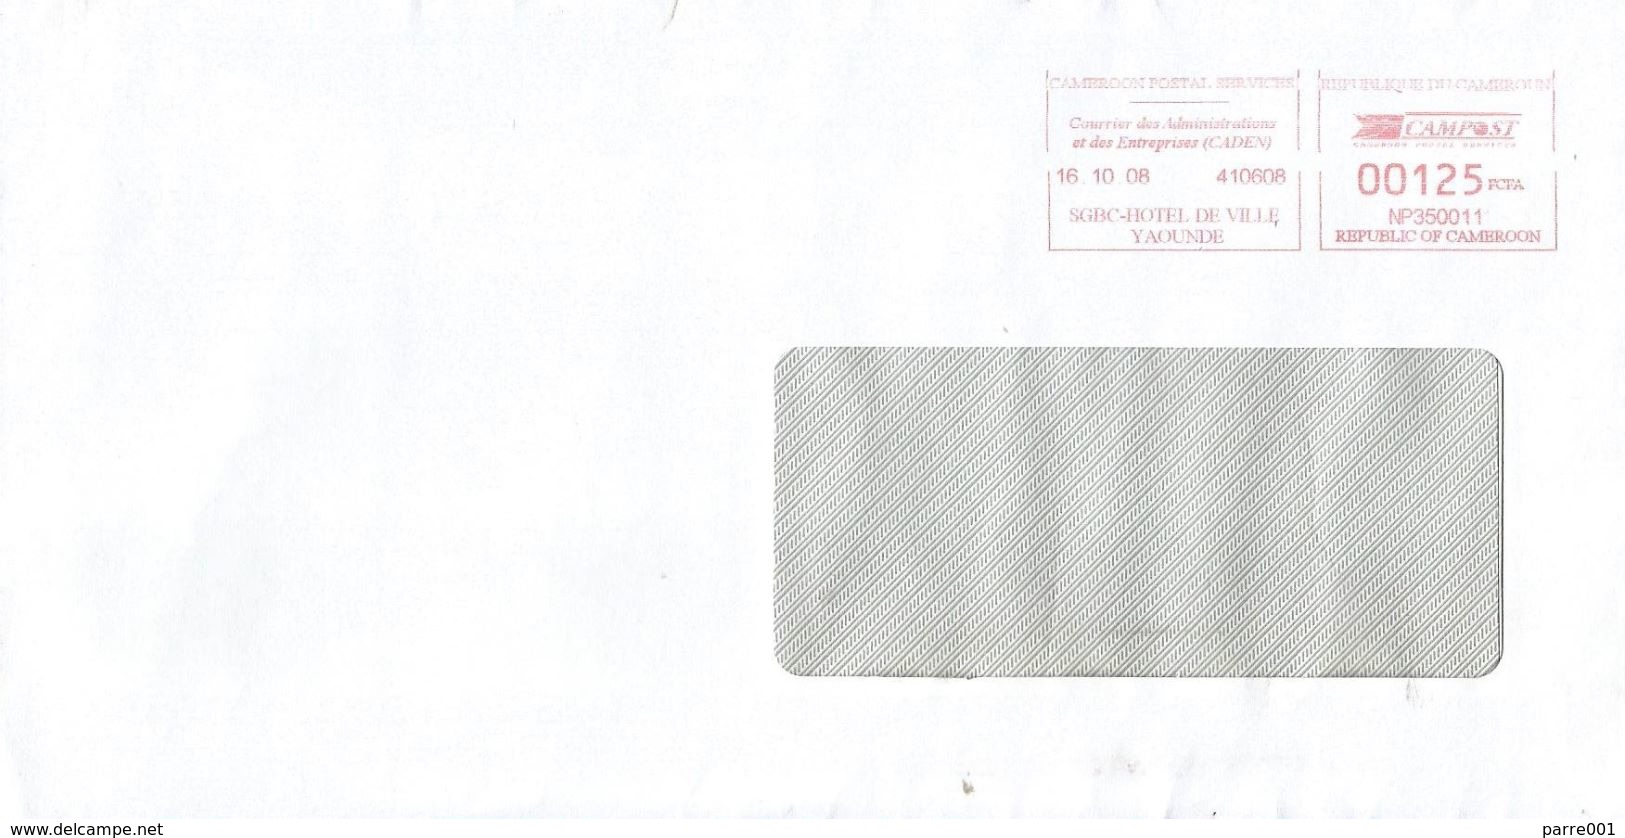 Cameroun Cameroon 2008 SGBC Bank Yaounde NP350011 Neopost Meter Franking Cover - Kameroen (1960-...)